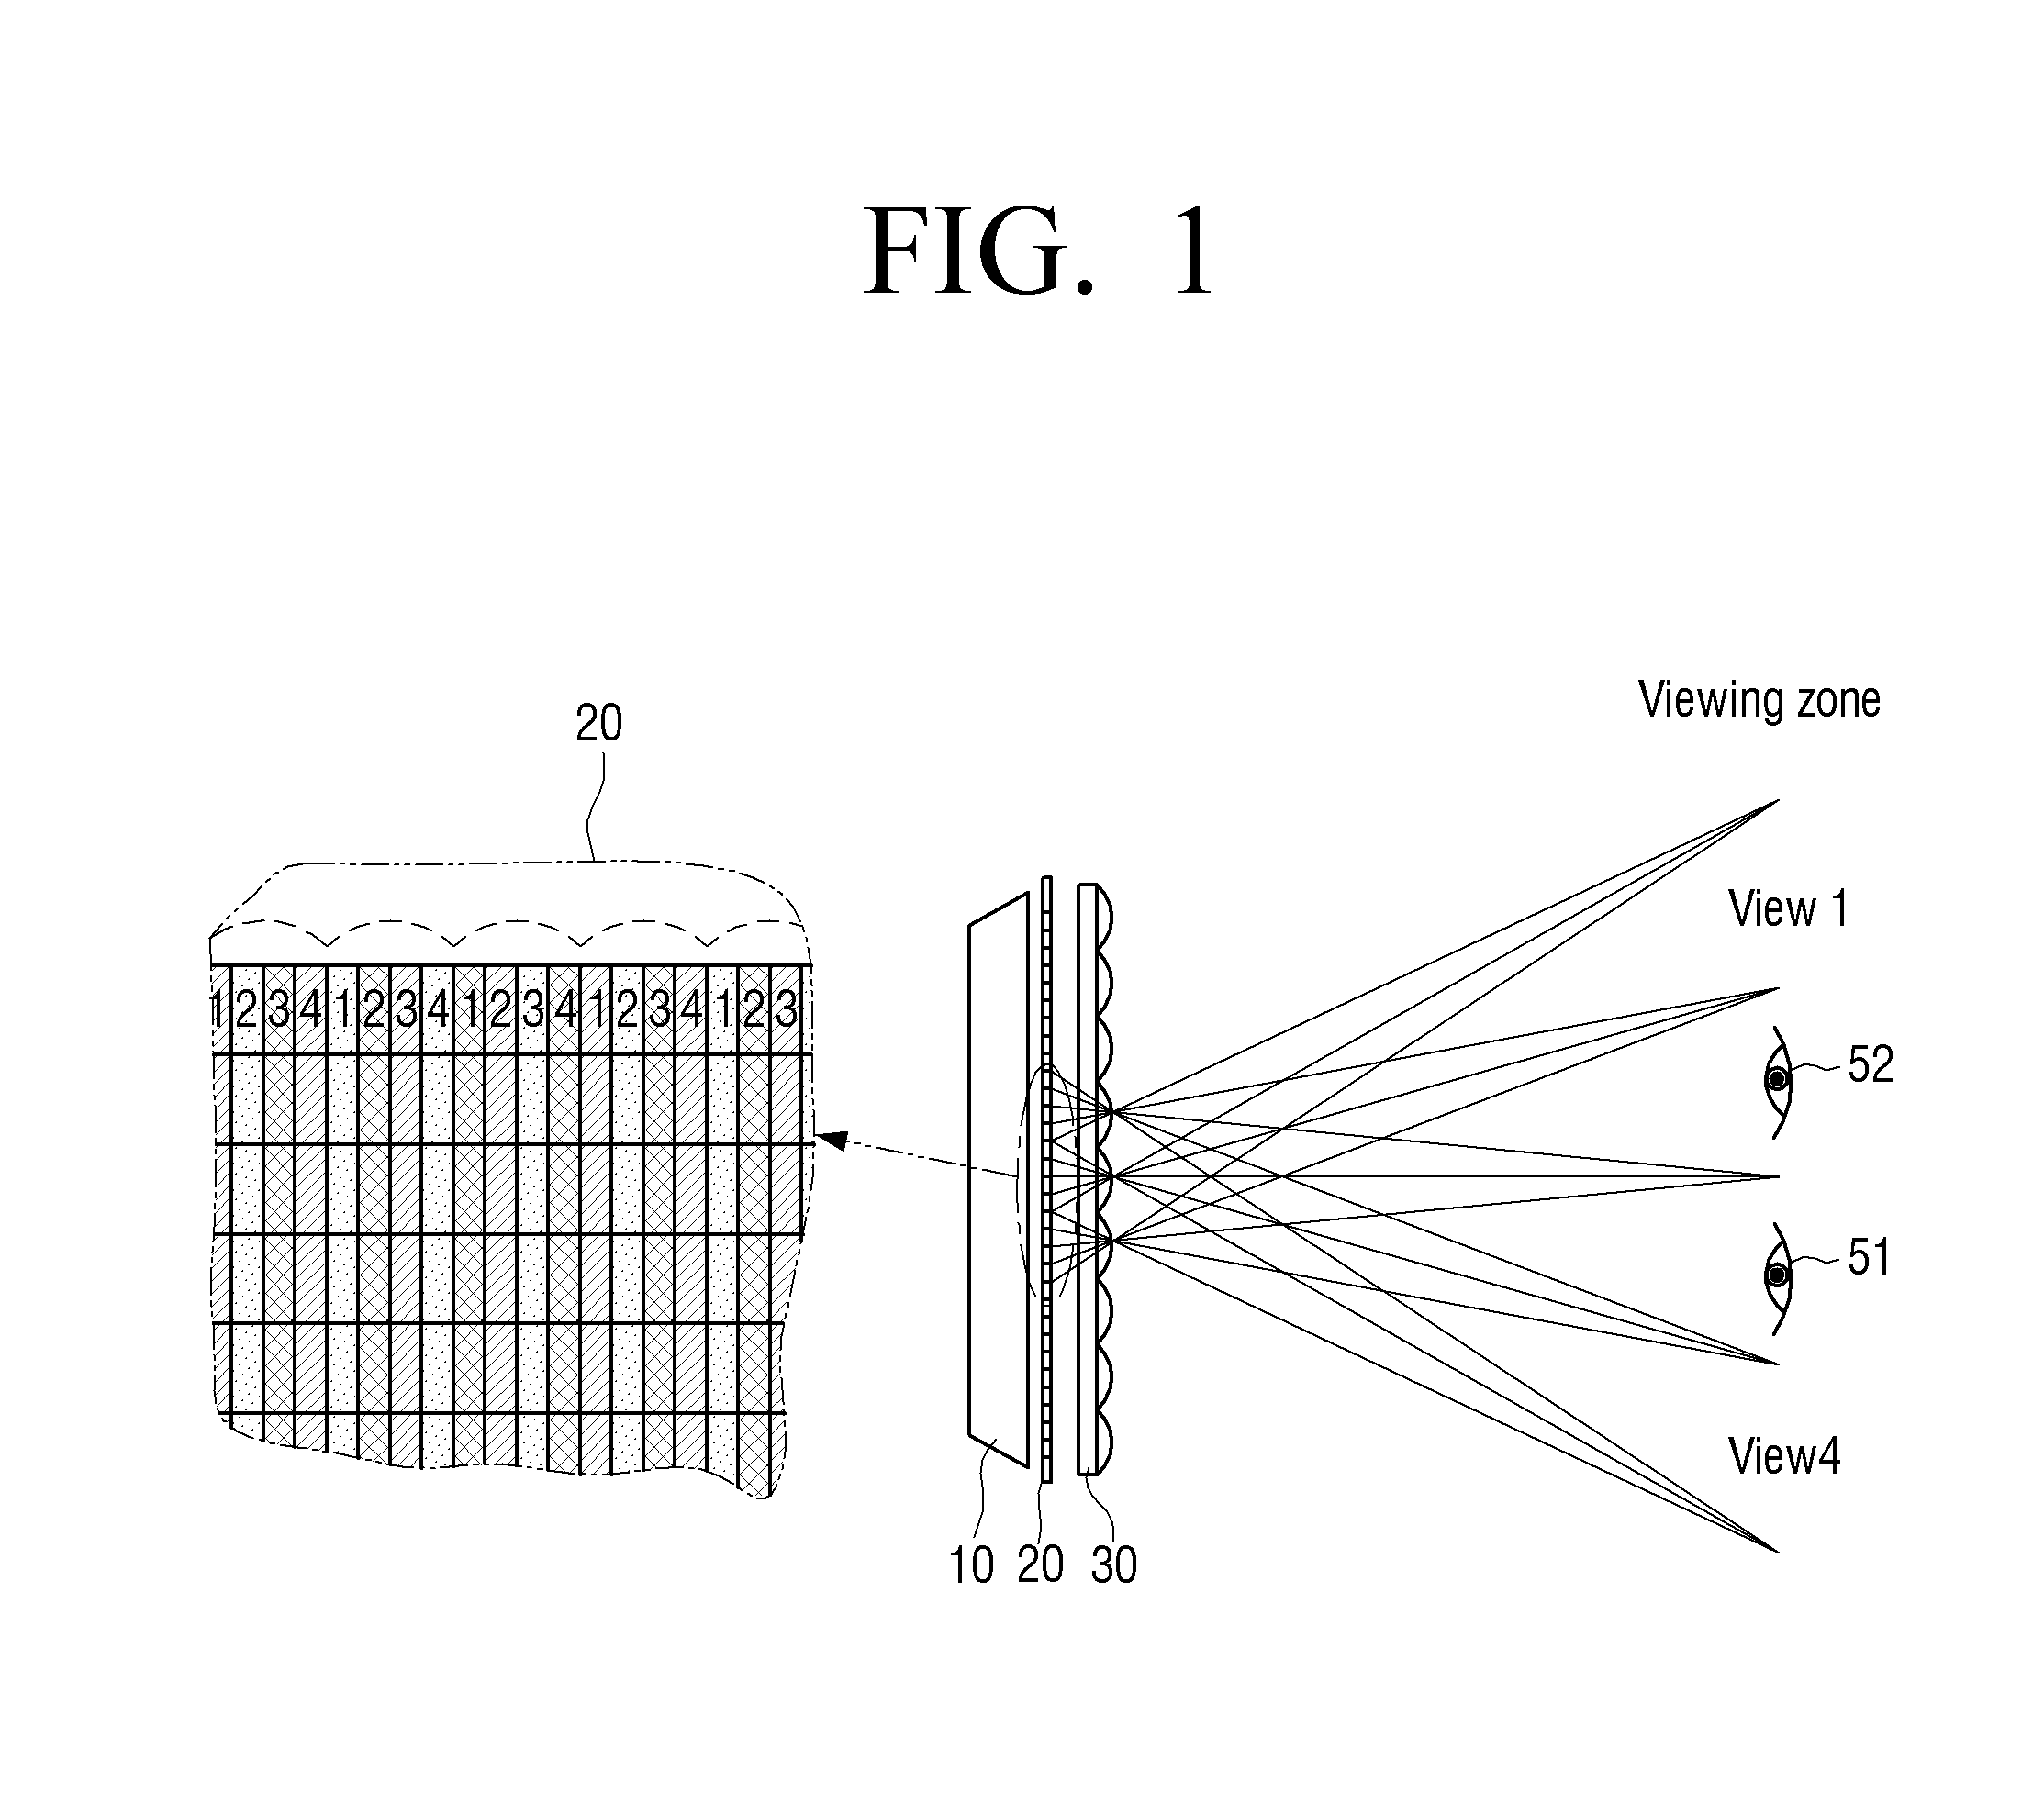 Multiple viewpoint image display device